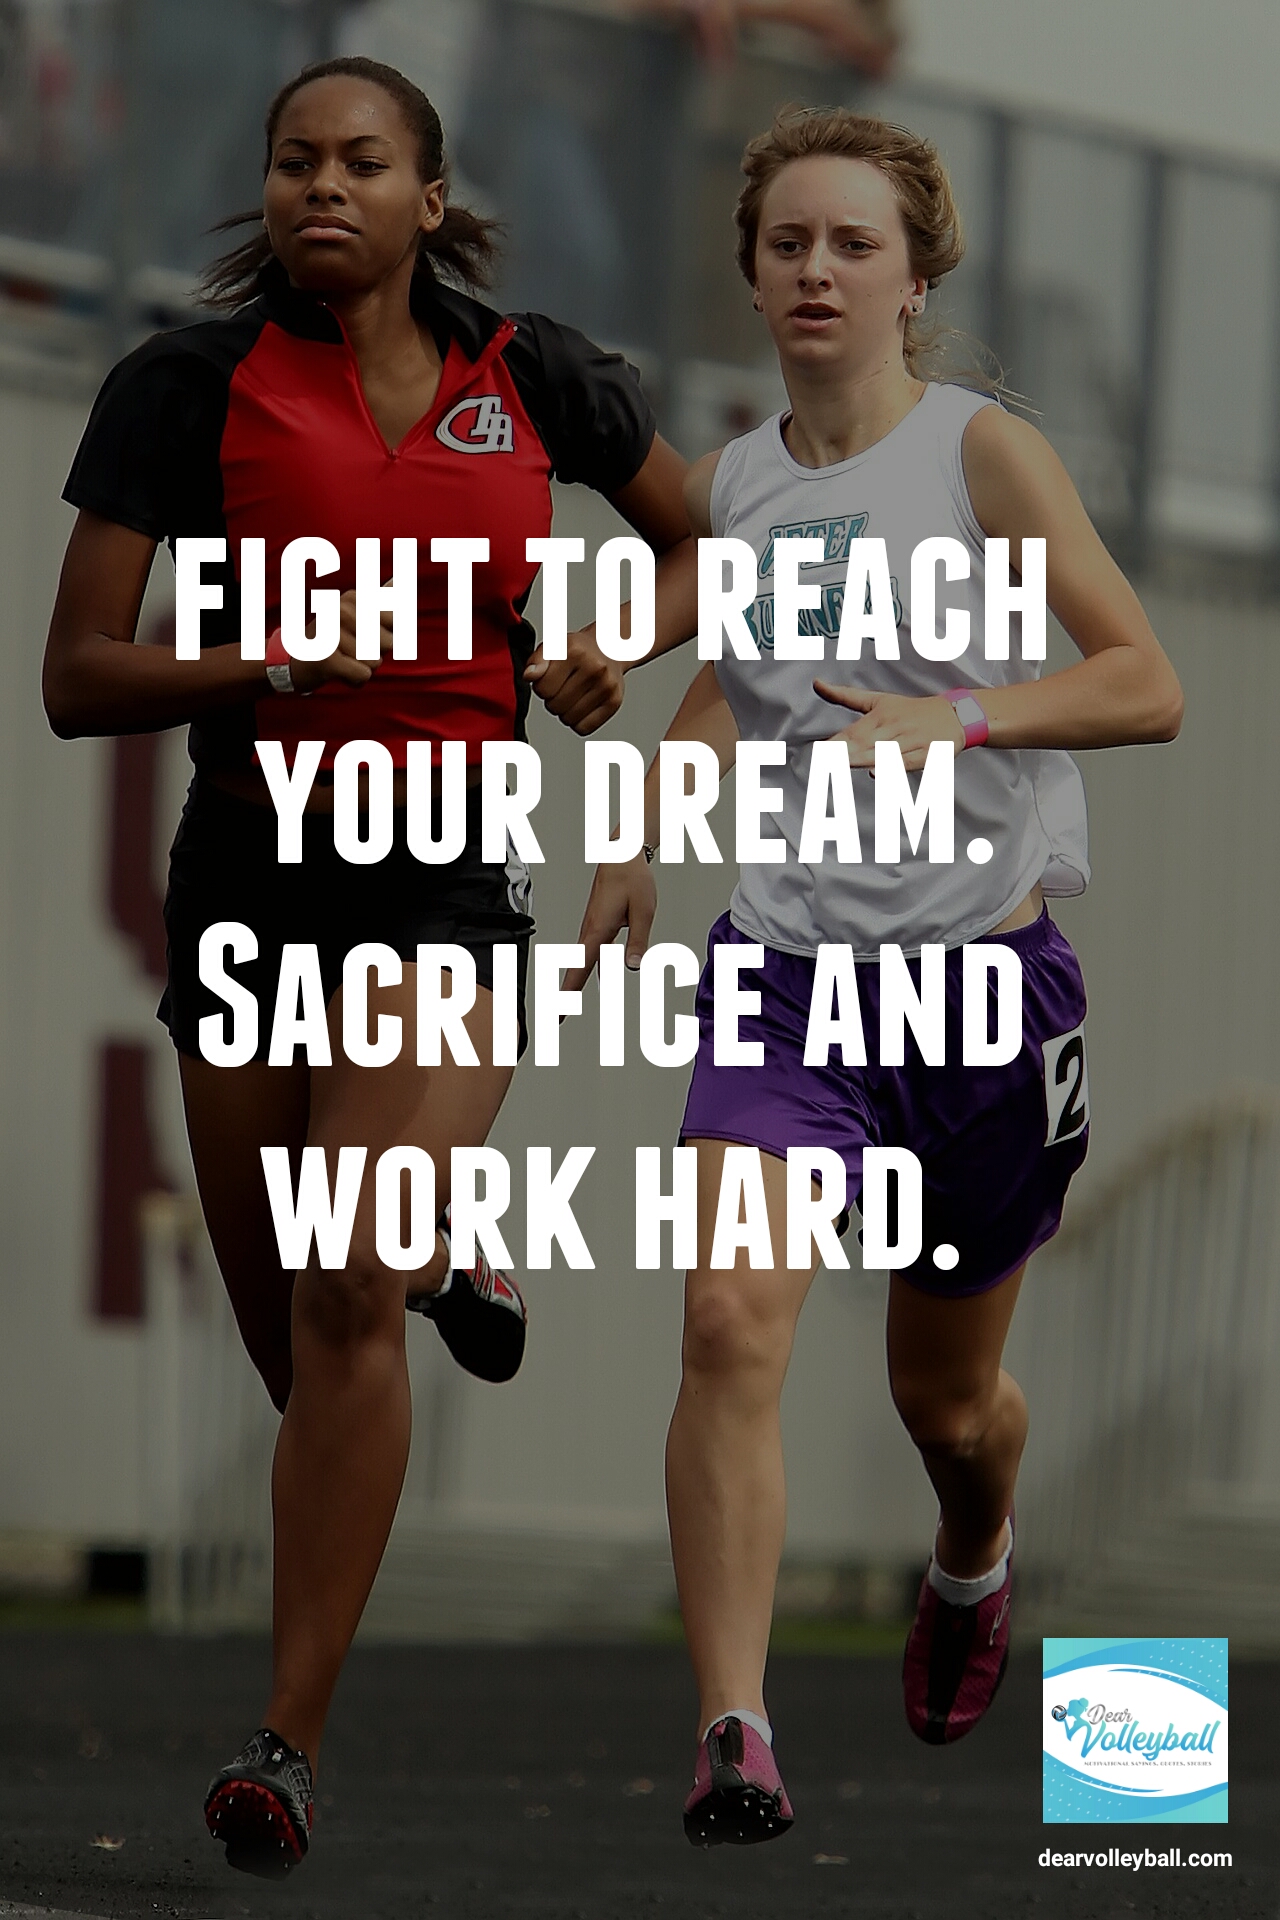 "Fight to reach your dream. Sacrifice and work hard." and other strong girls pictures paired with an inspirational volleyball quote on Dear Volleyball.com.